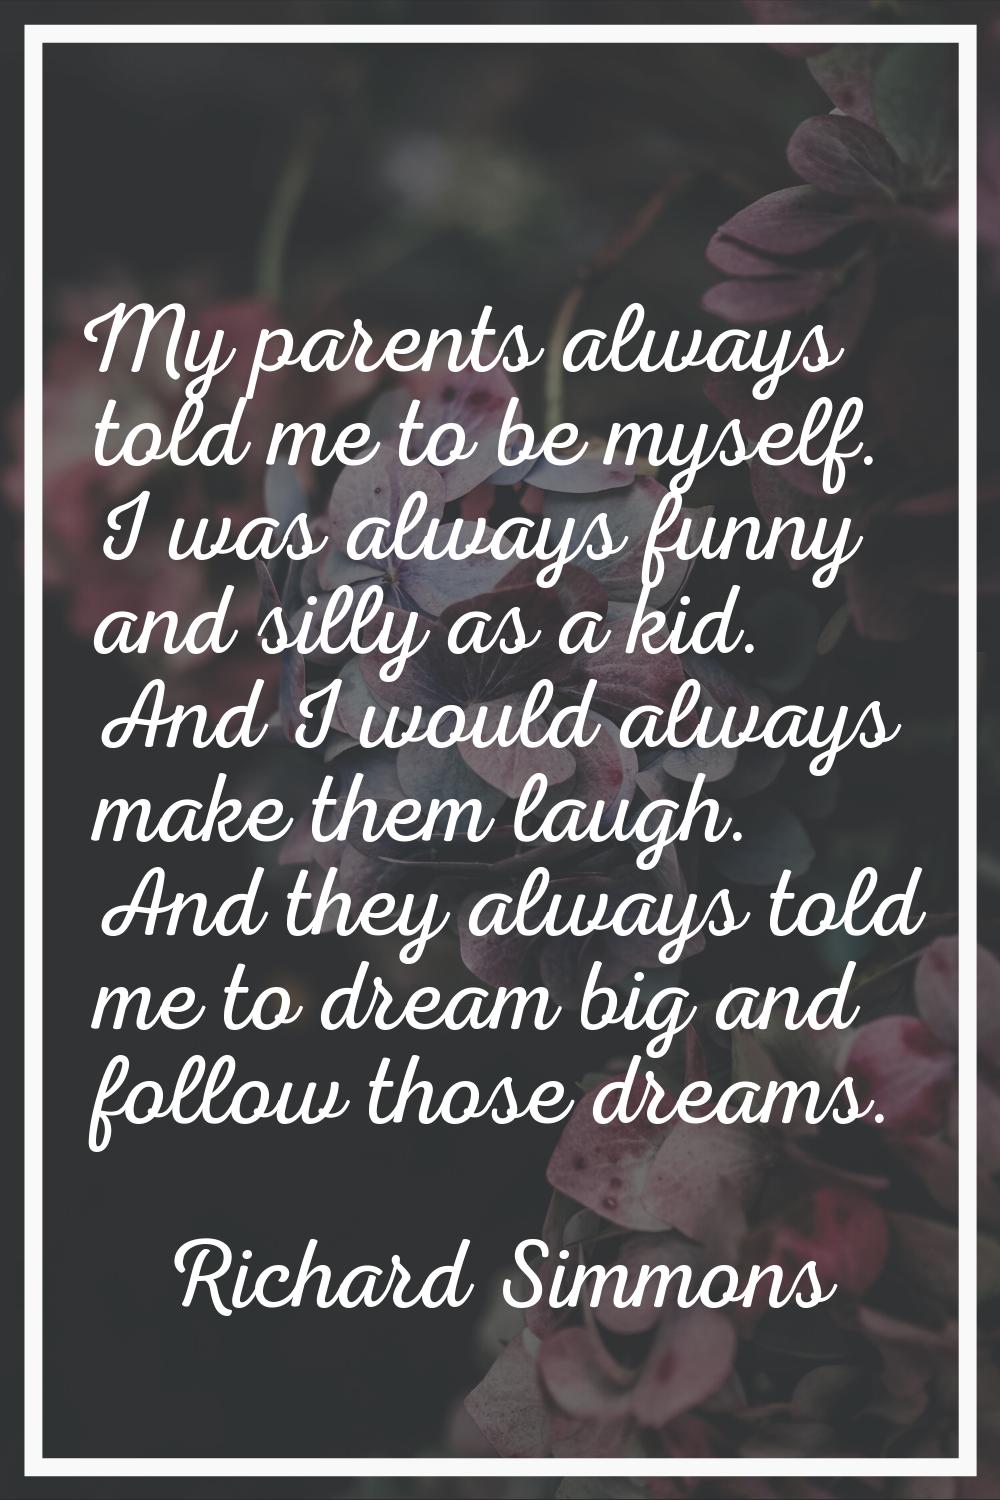 My parents always told me to be myself. I was always funny and silly as a kid. And I would always m